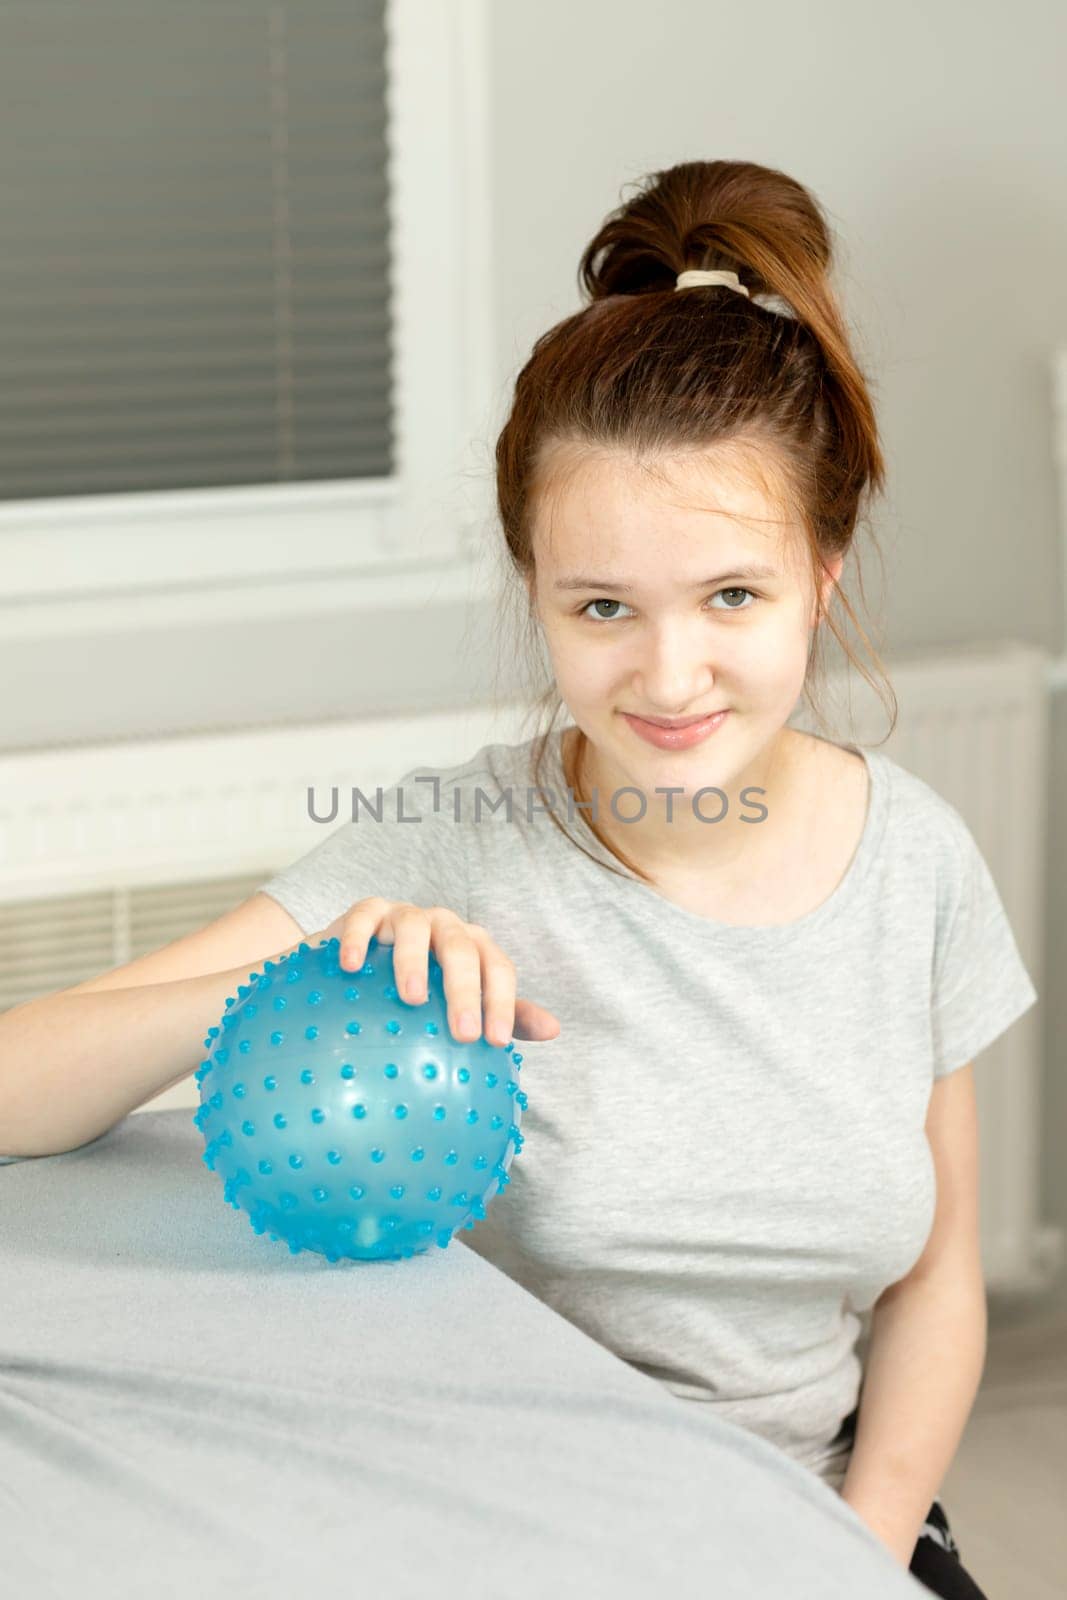 Portrait Of Cheerful Girl With Cerebral Palsy Sitting in Chair, Holding Blue Massage Ball with Pimples in Hospital. Rehabilitation. Balance And Posture Maintenance, Cure. Vertical plane.